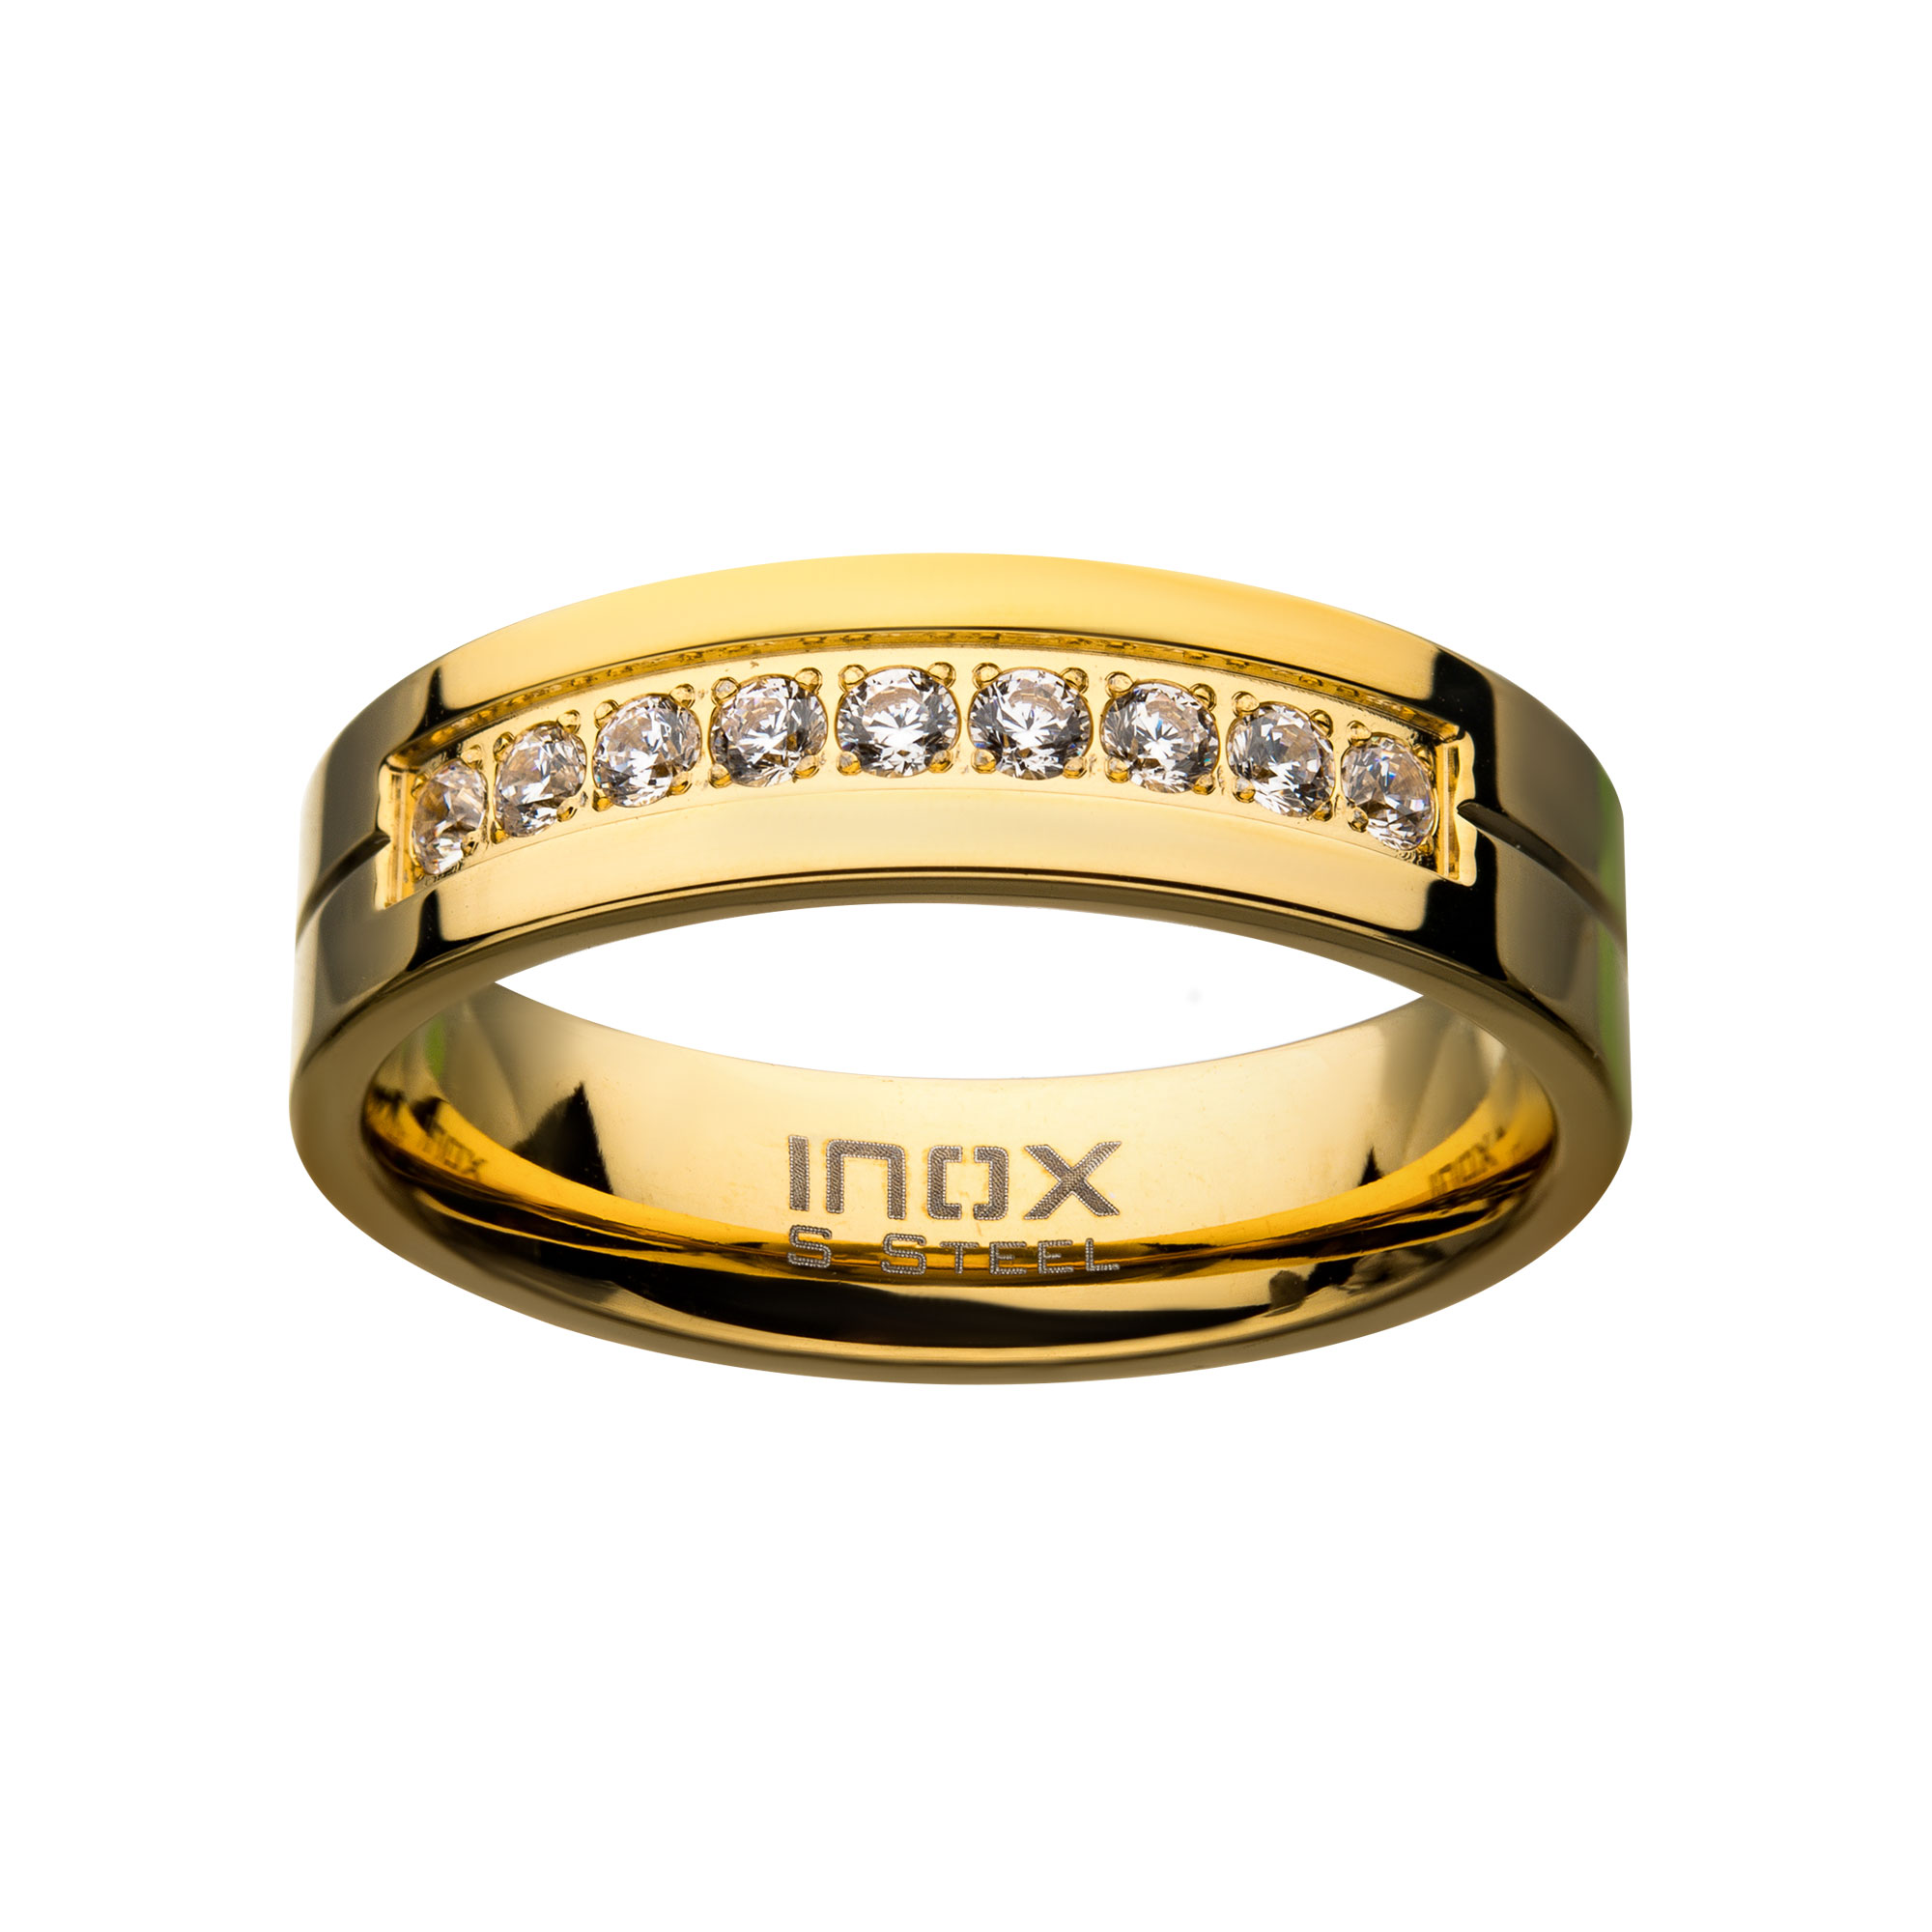 Gold PVD Plating Polished Steel ComfortFit Band with CZ's in Bead Channel Setting Ring Image 2 Lewis Jewelers, Inc. Ansonia, CT